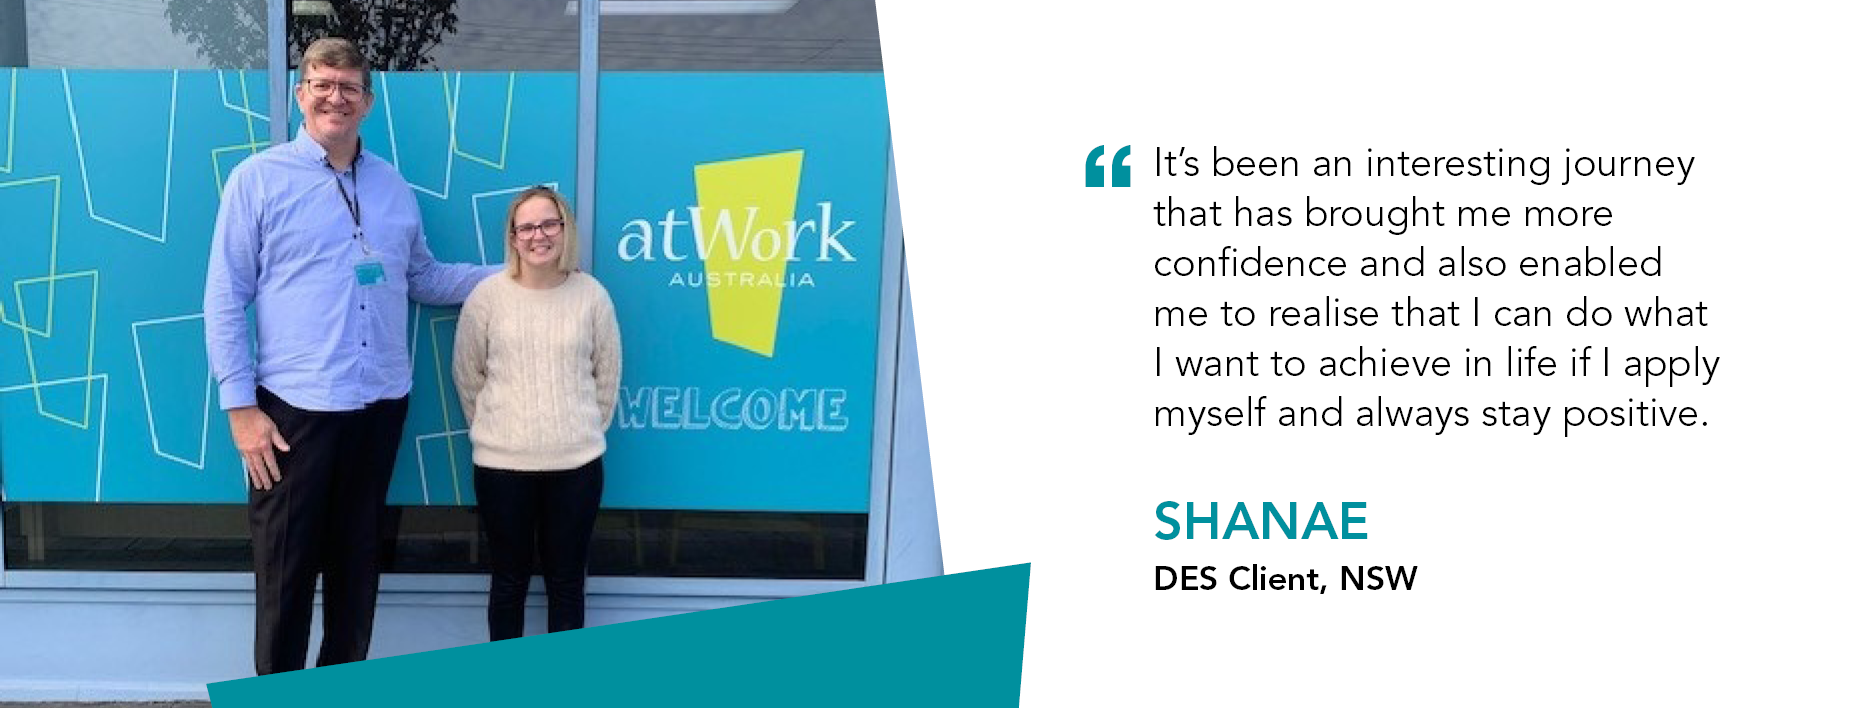 Quote reads "It's been an interesting journey that has brought me more confidence and also enabled me to realise that I can do what I want to achieve in life if I apply myself and always stay positive." said Shanae DES Client New South Wales